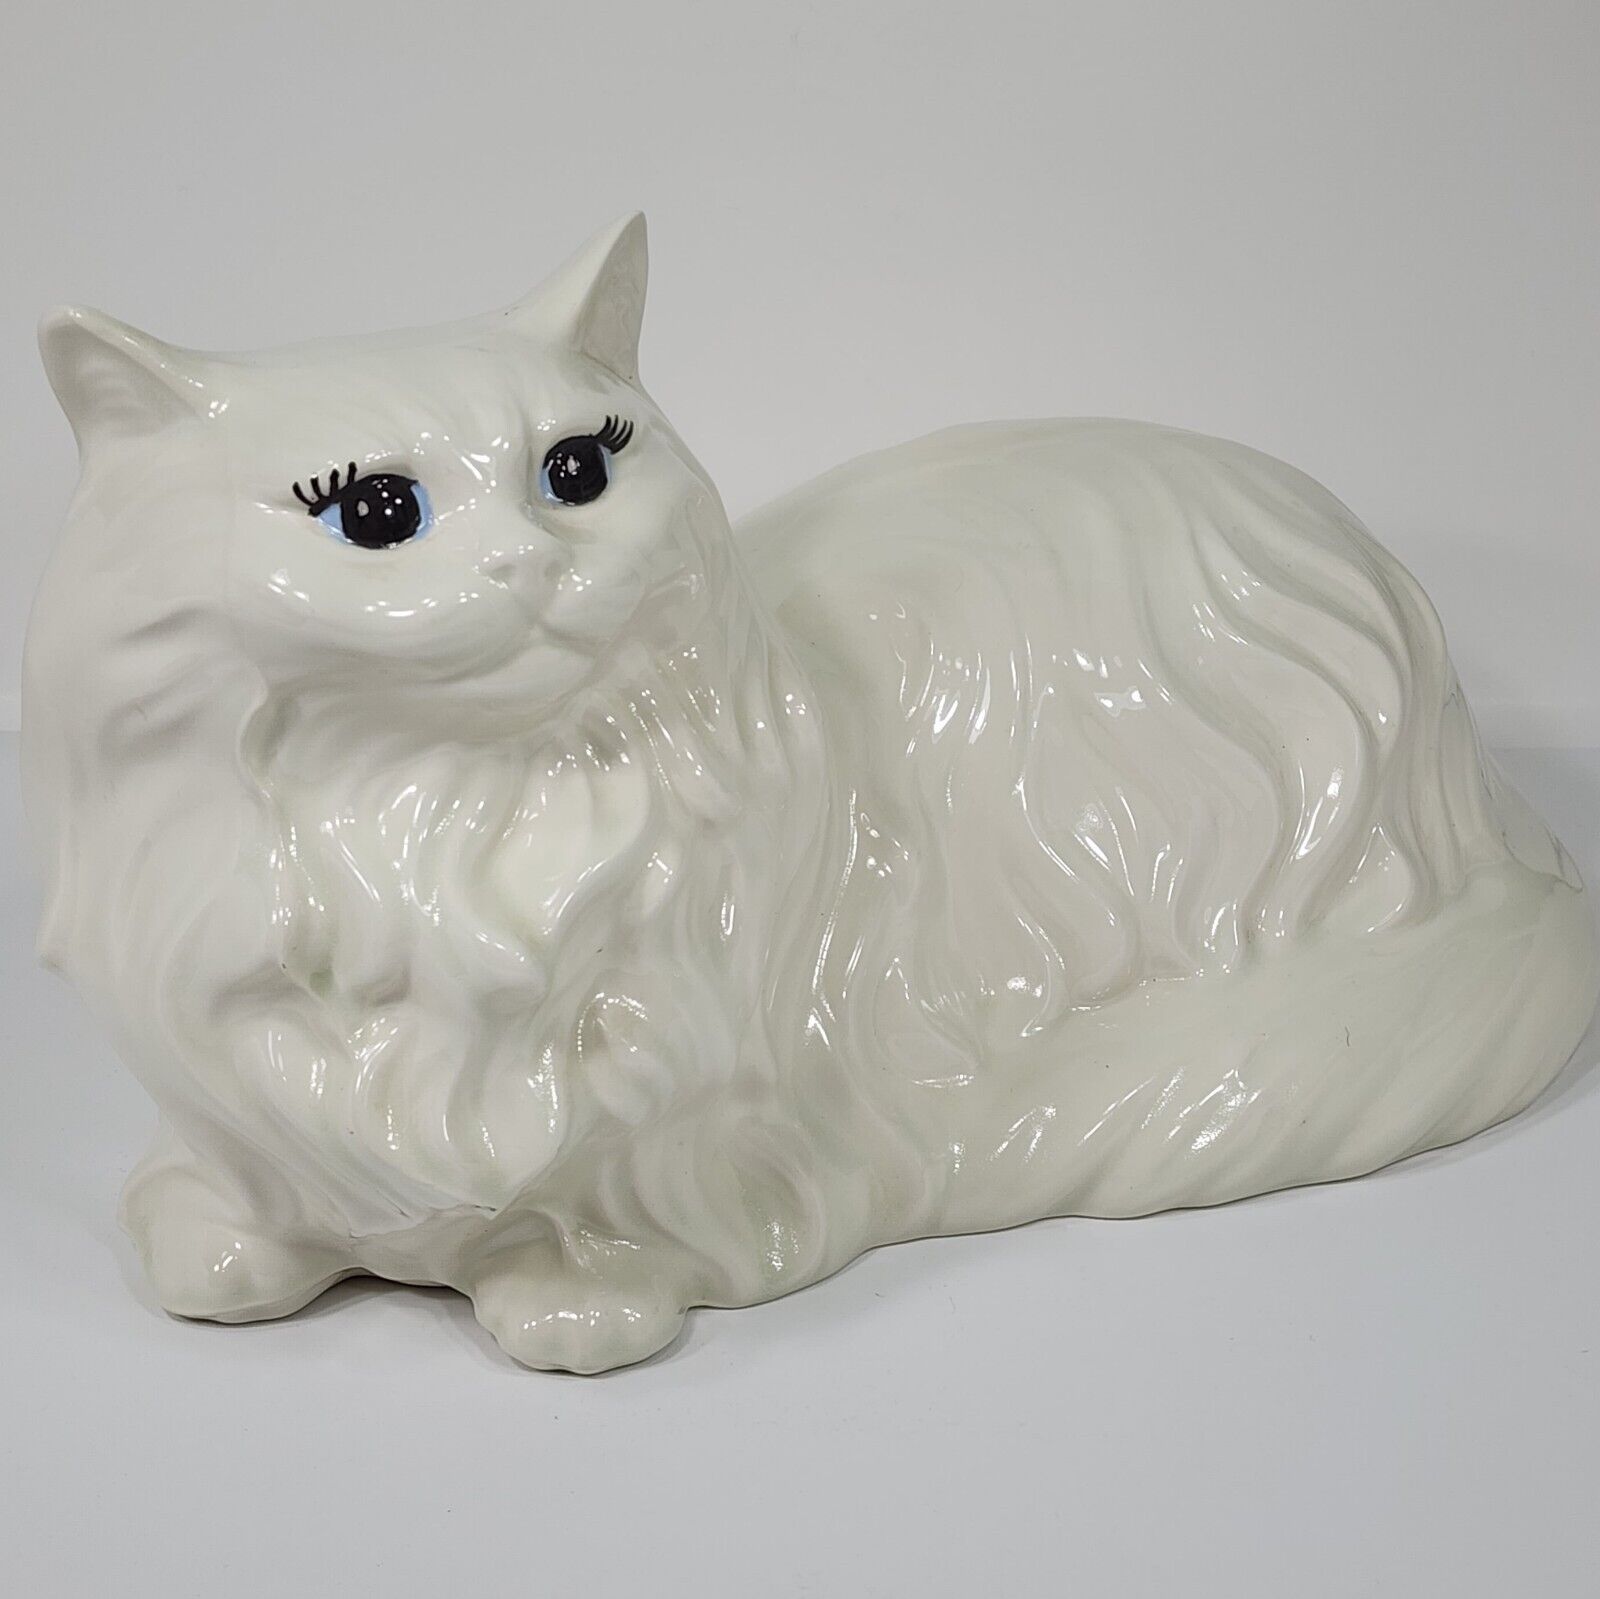 Vintage Large White Ceramic Persian Cat Statue Figurine Laying Down